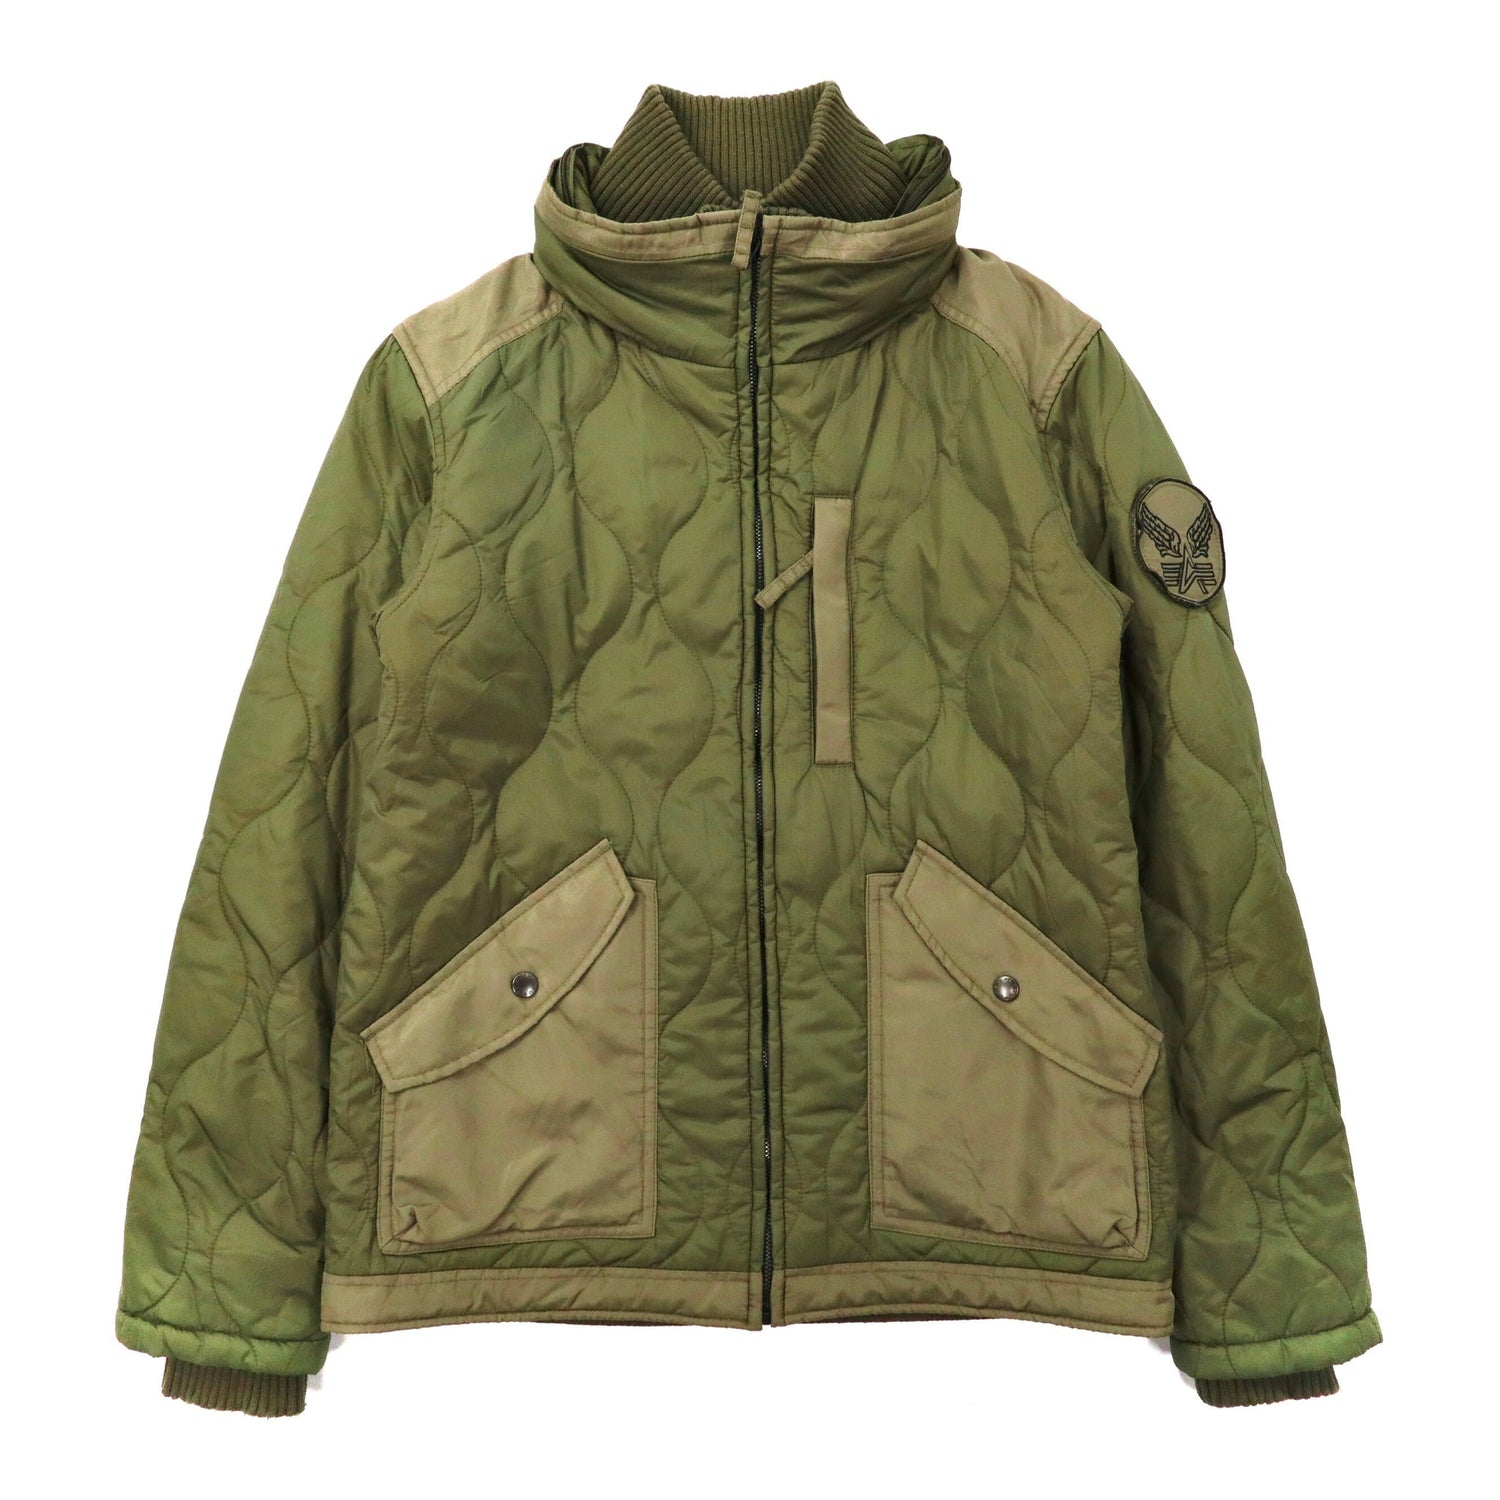 ALPHA INDUSTRIES INC. Military Quilted Jacket M Khaki Nylon Hoodie 